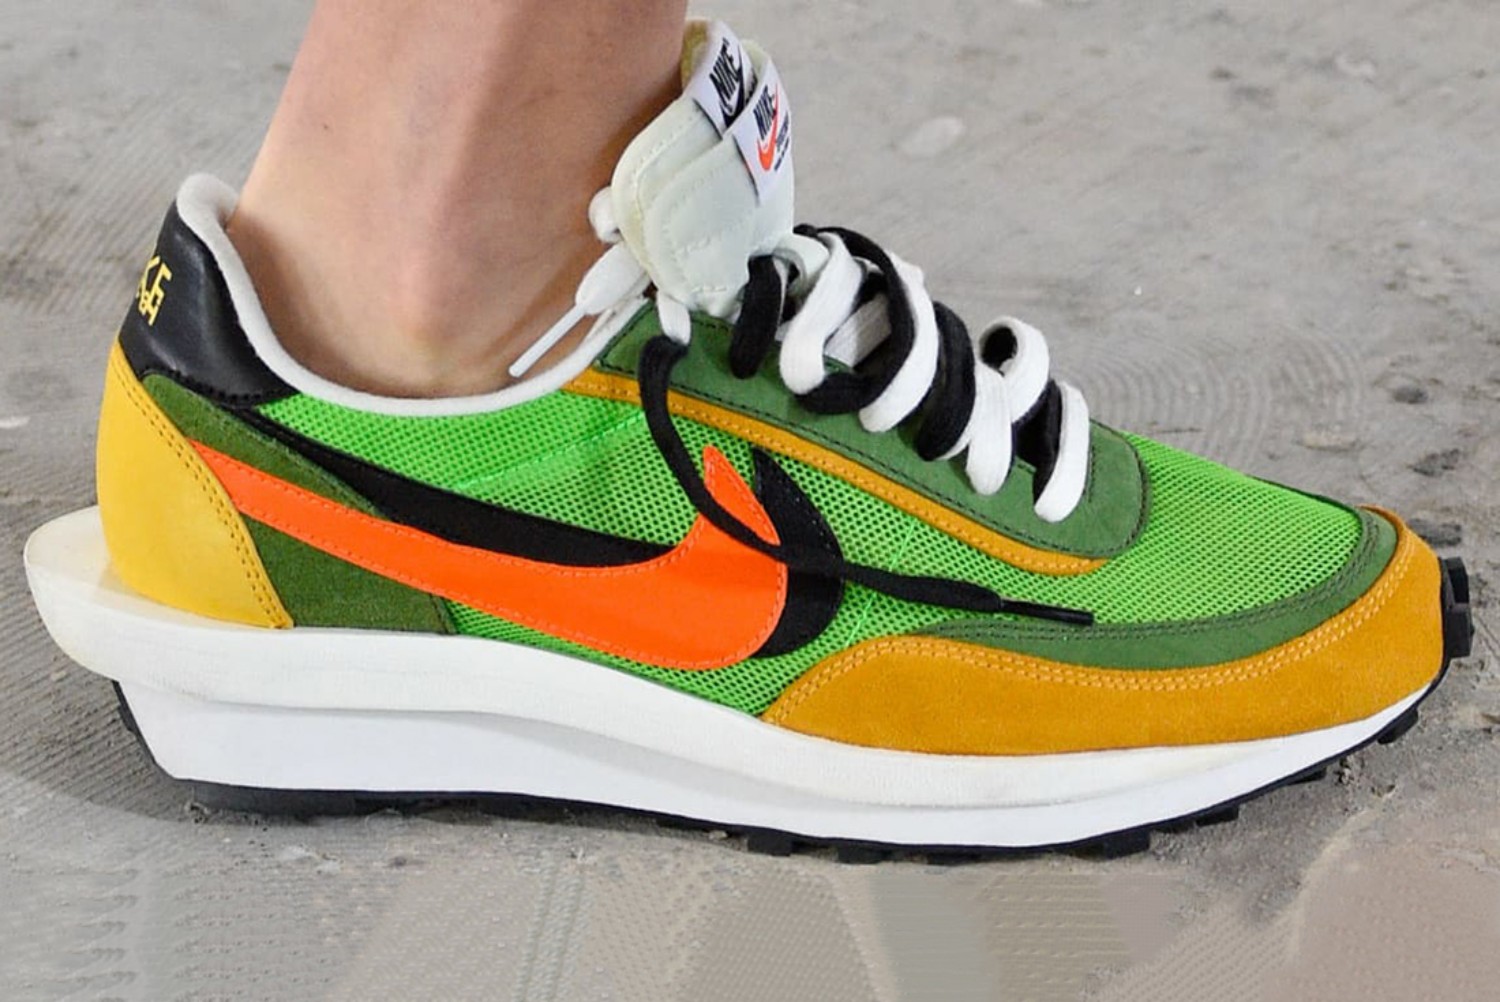 Nike Collaboration For Spring 2019